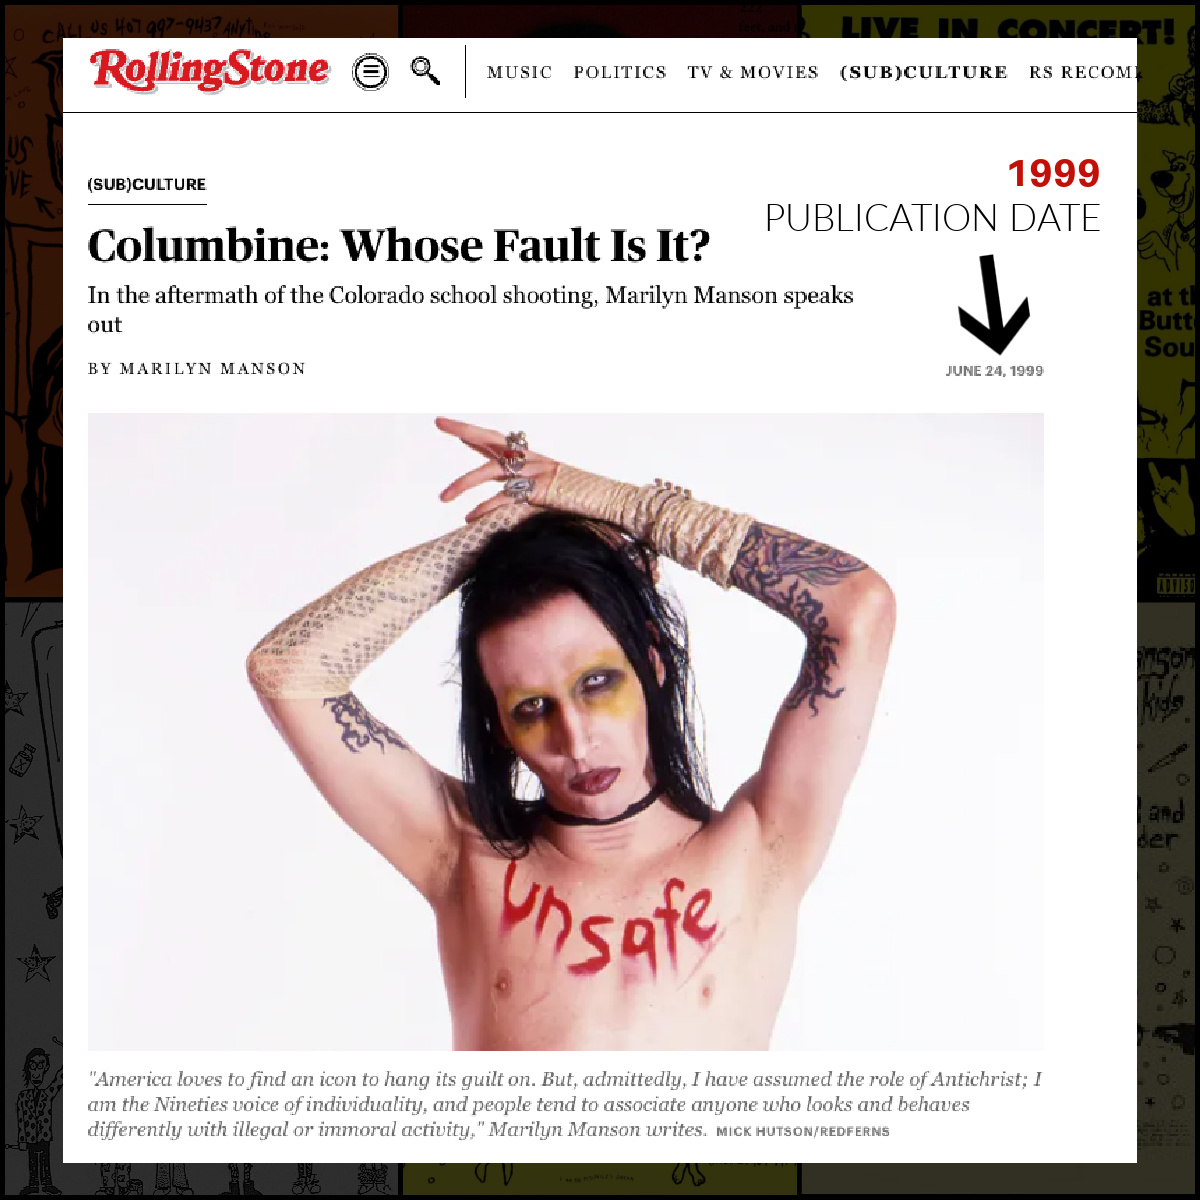 Rolling Stone Marilyn Manson and hypocrisy of Jeff Anderson and Karen Barth Menzies